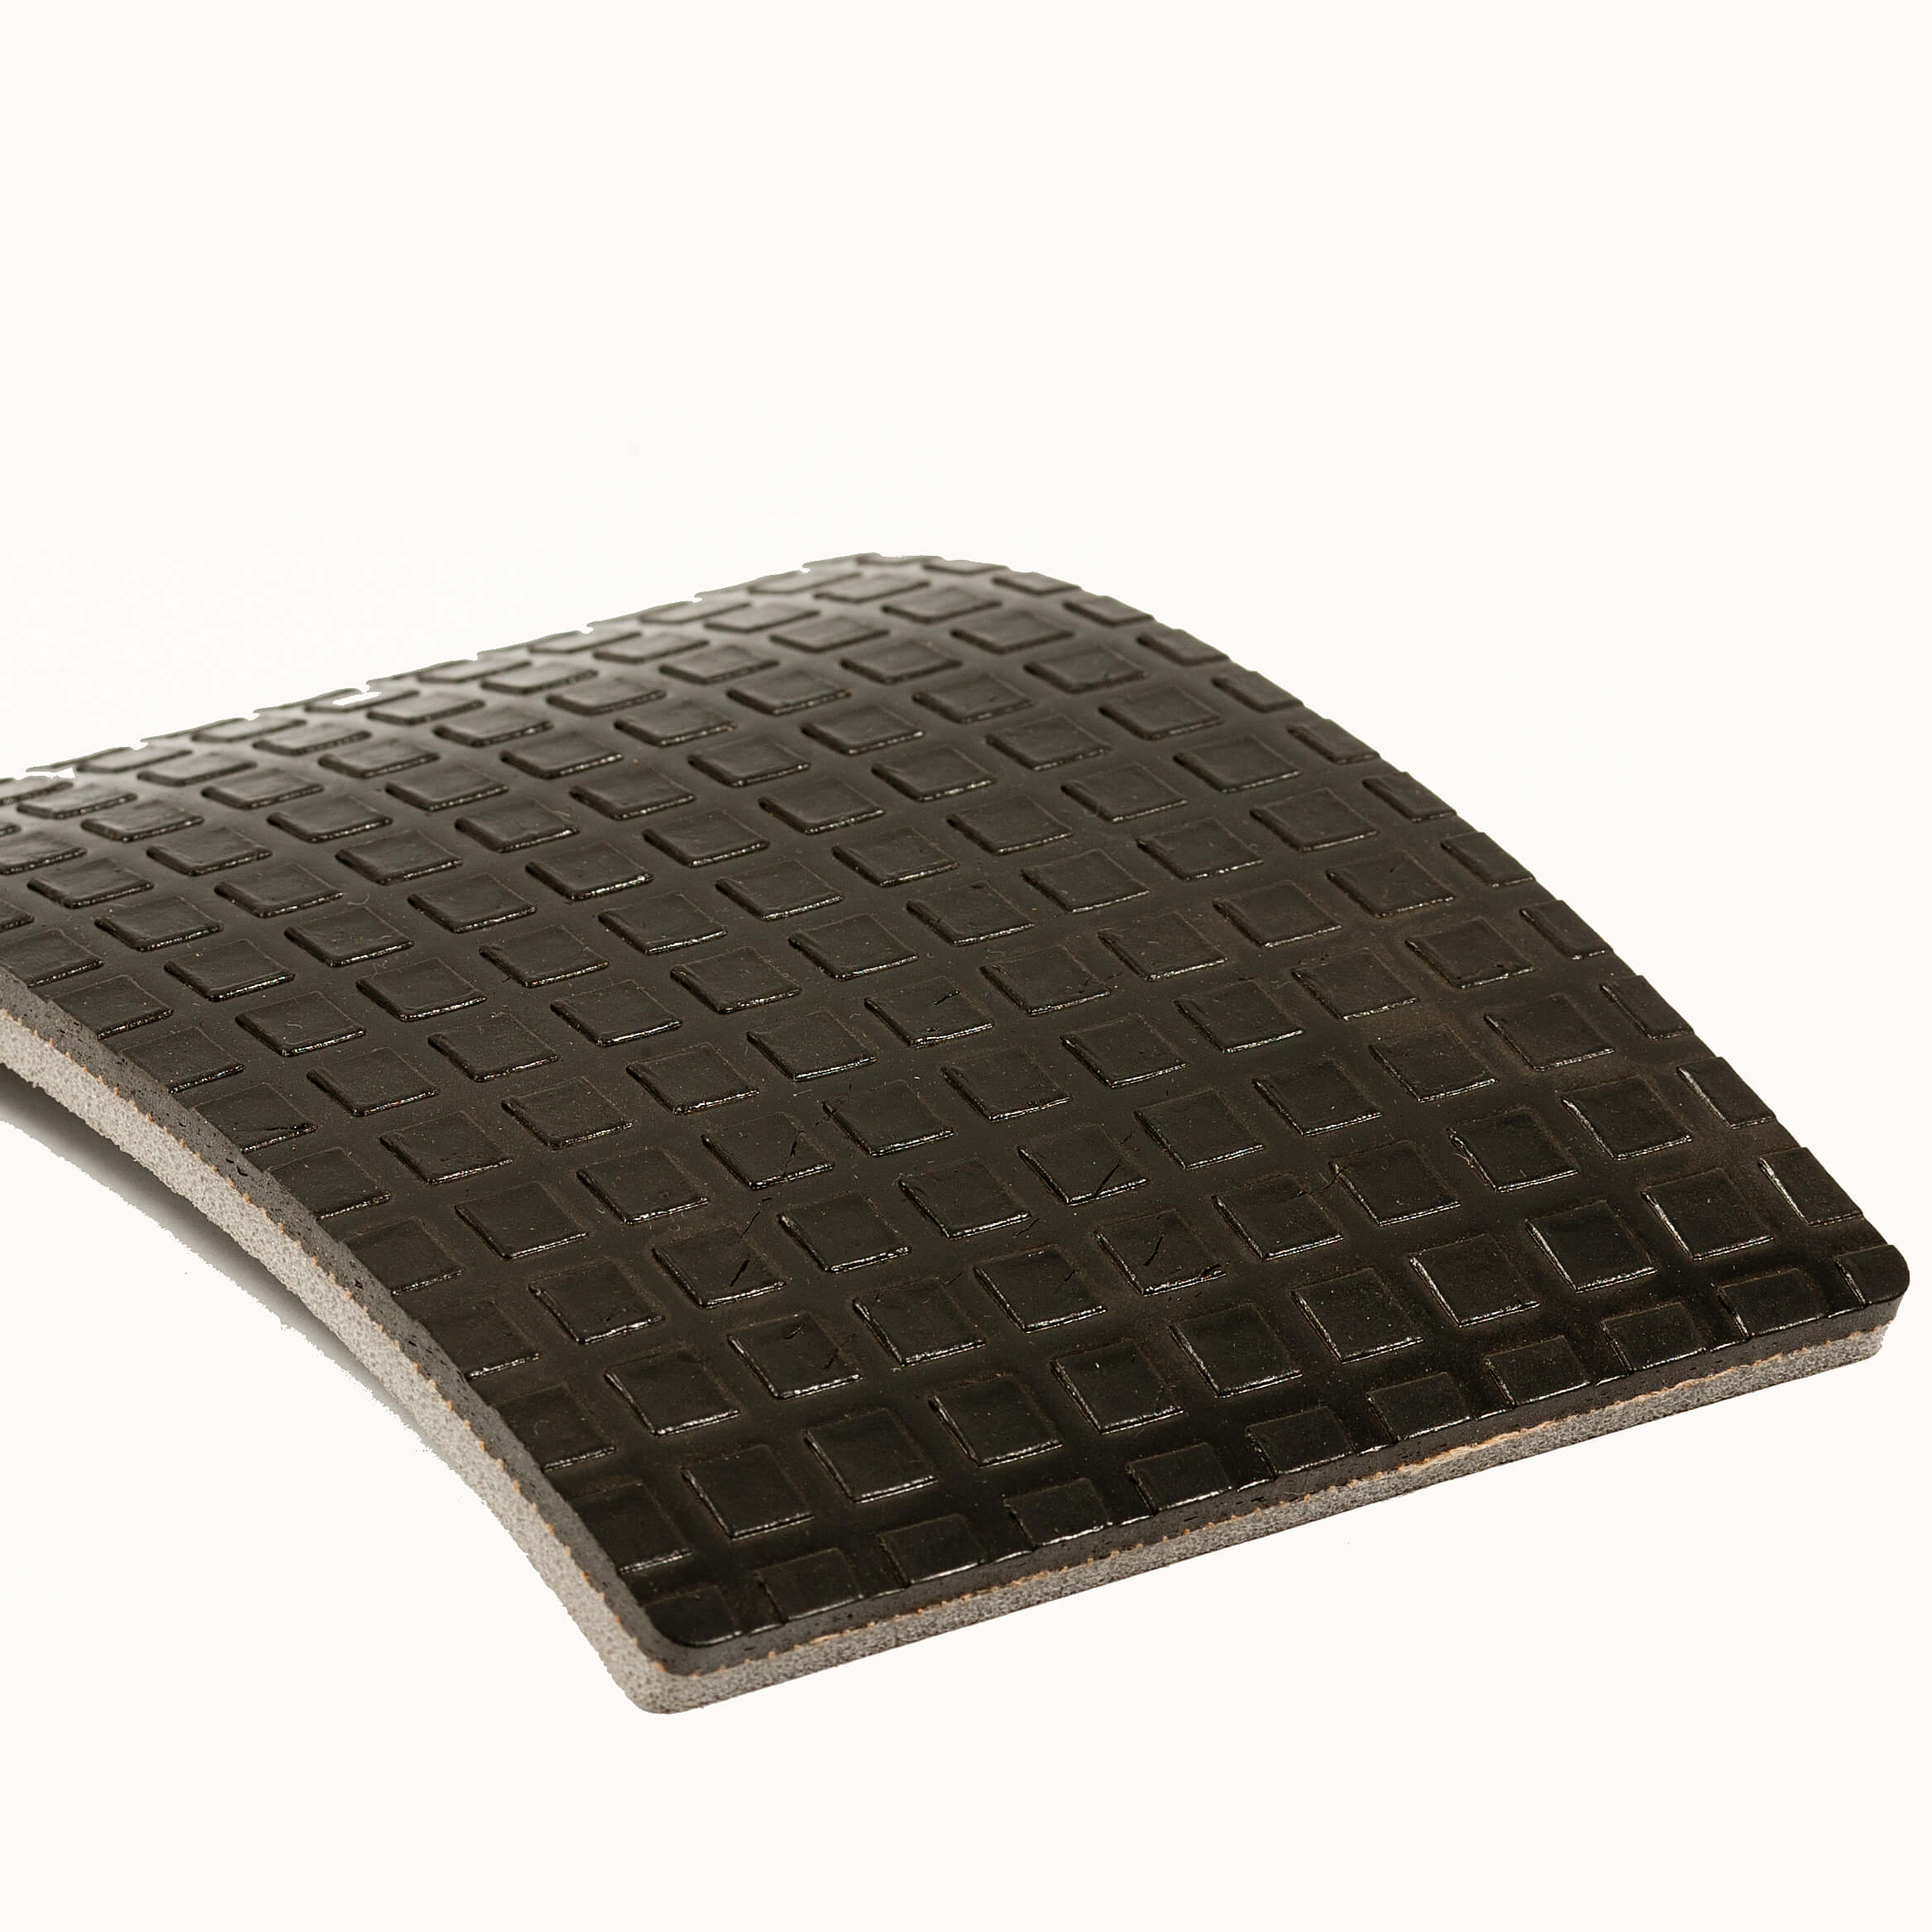 Waterproof and durable floor and sound insulation mat